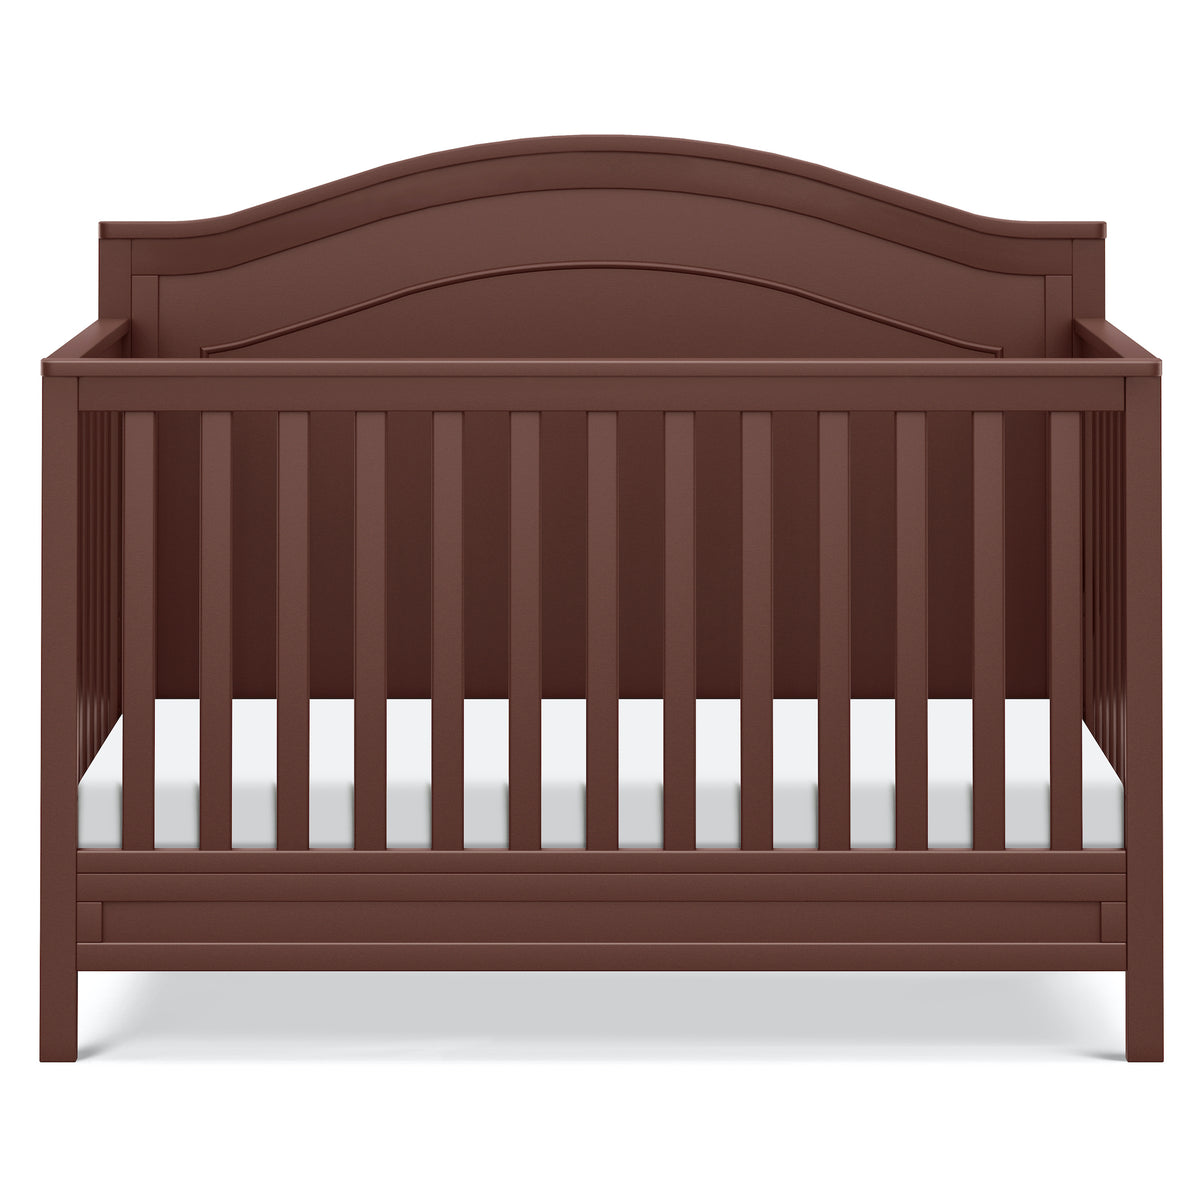 Charlie 4-in-1 Convertible Crib